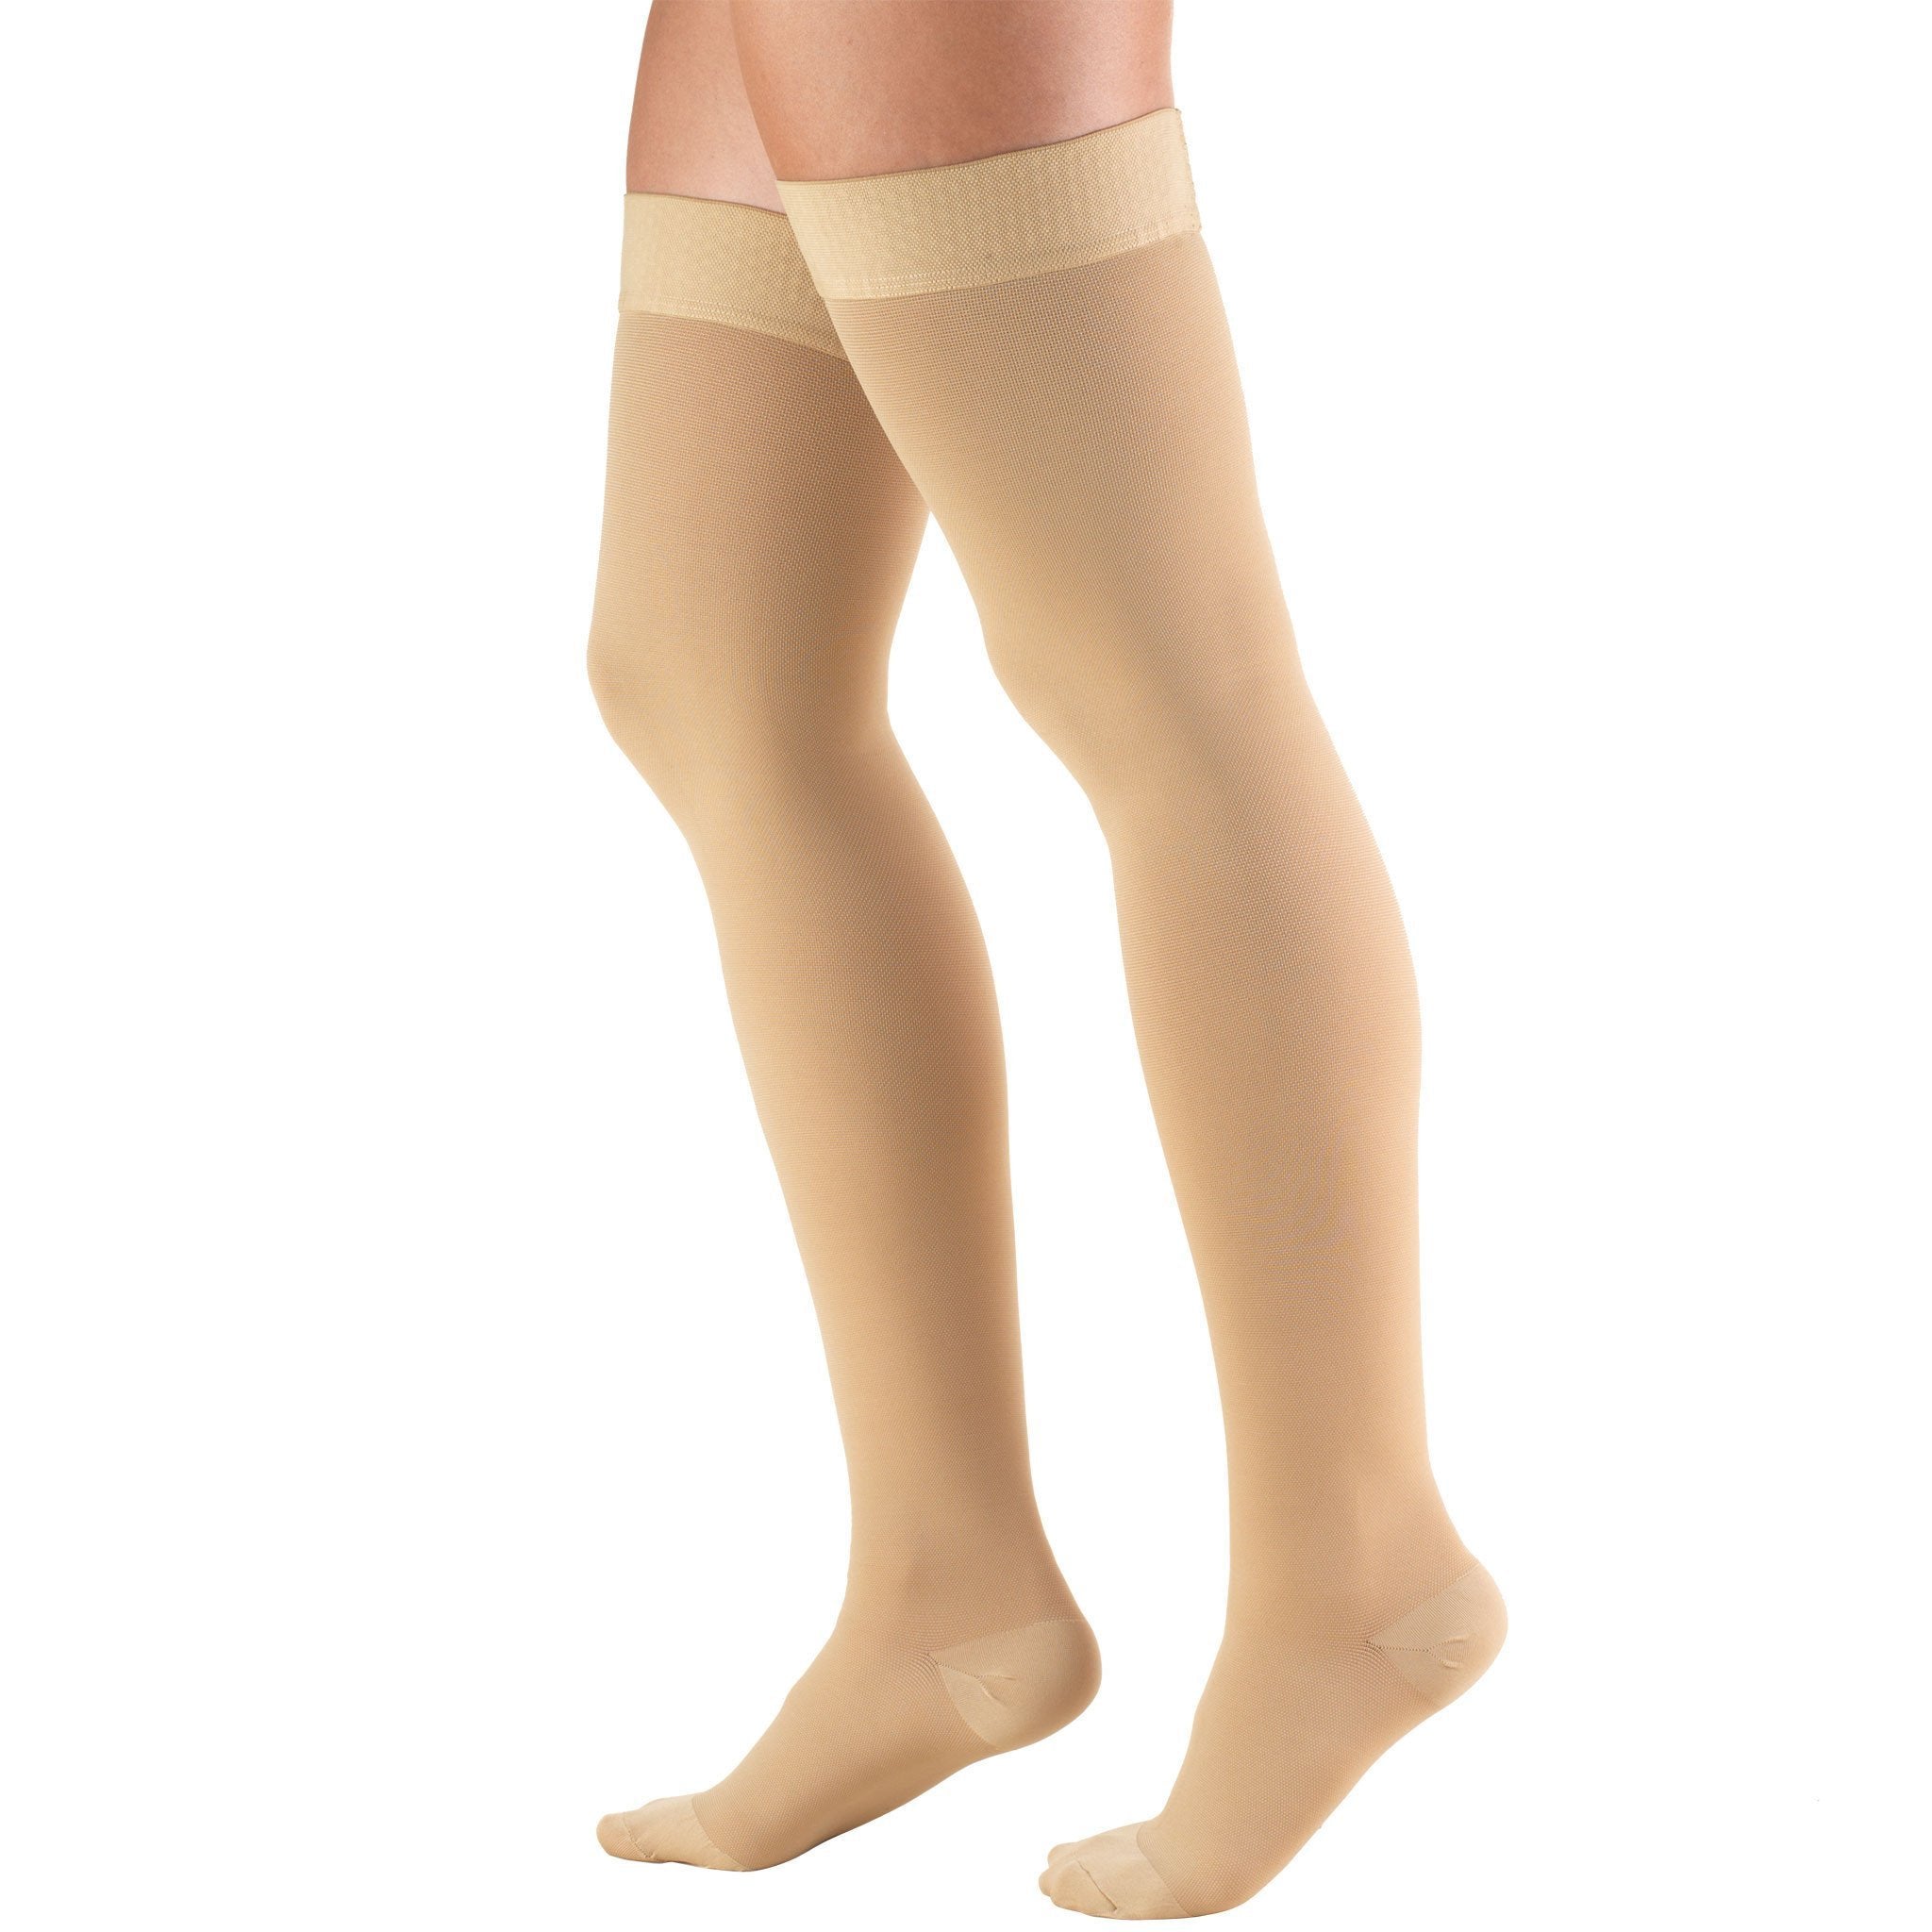 2x Compression Stockings 20-30mmHg Medical Varicose Vein Relief